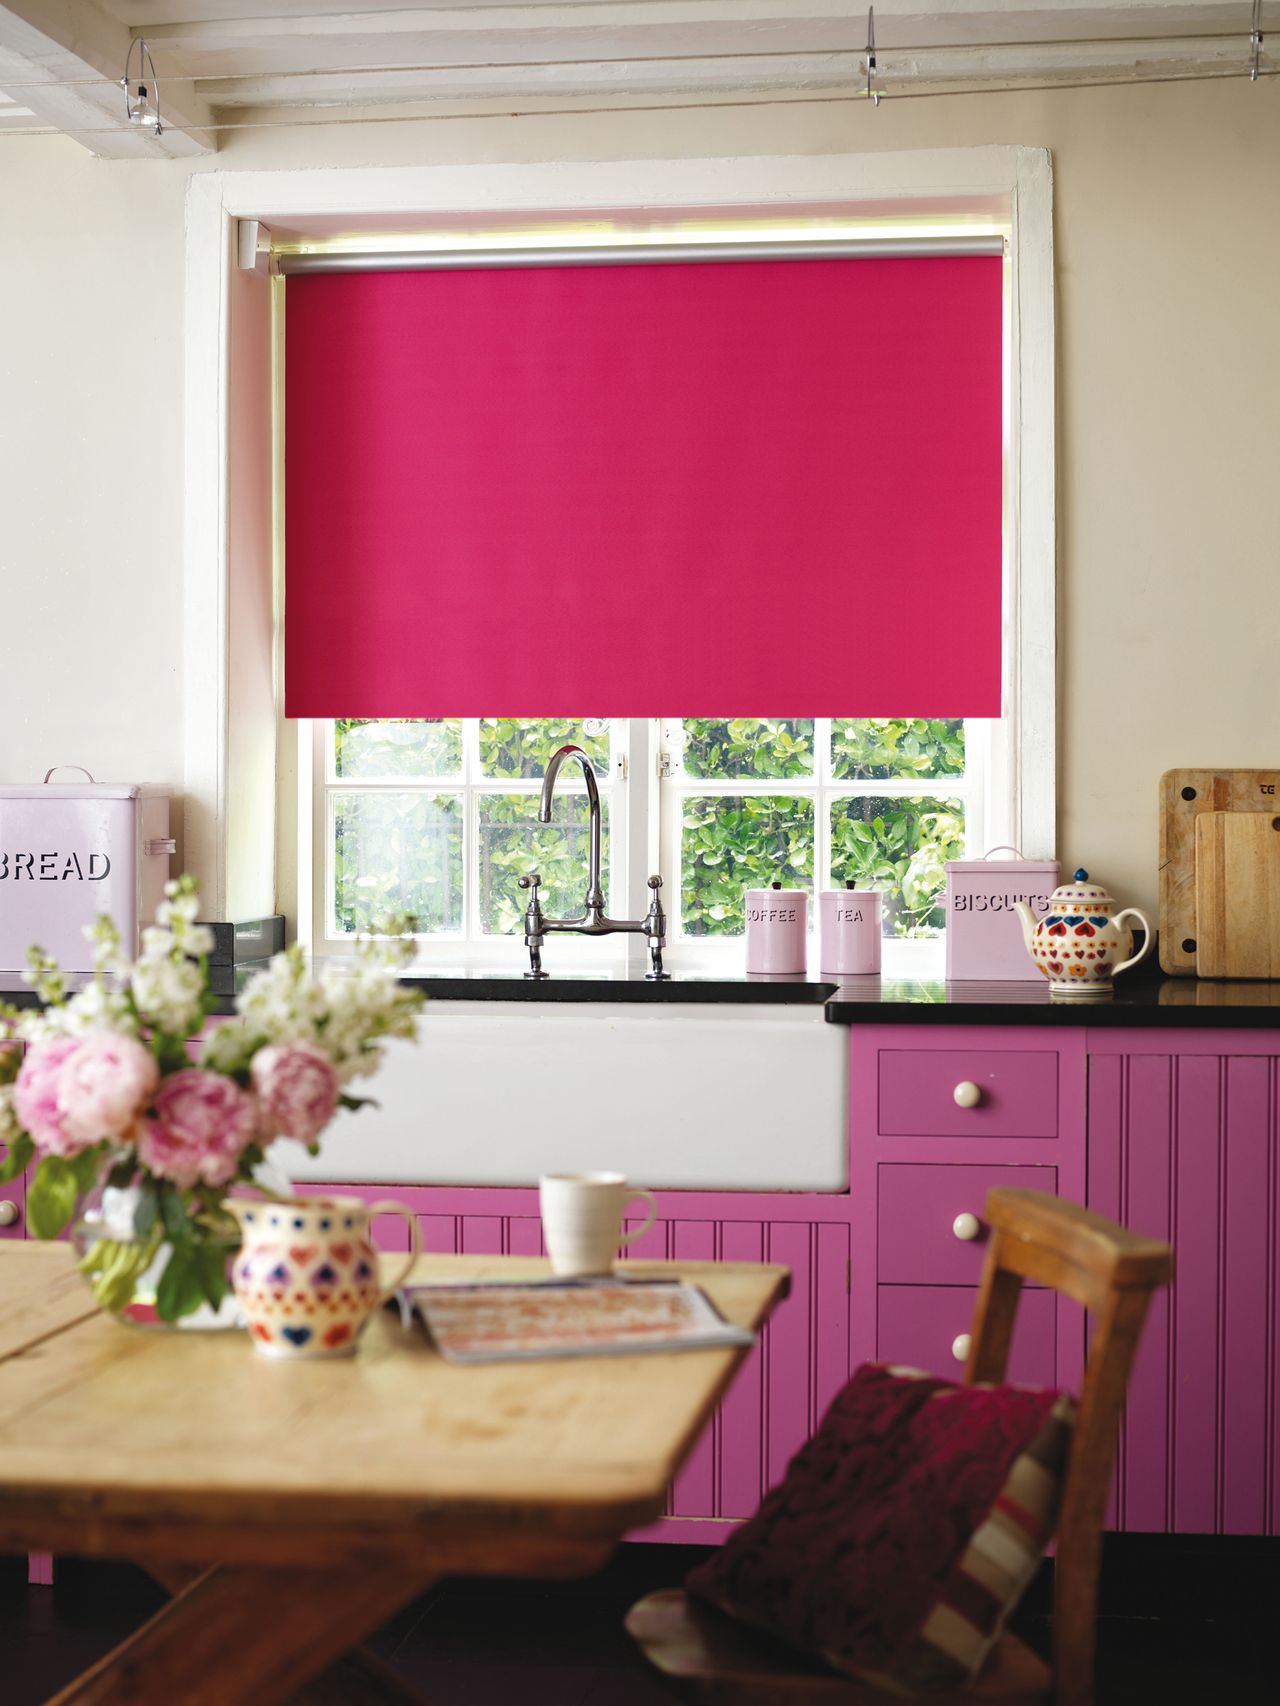 14 Kitchen Blind Ideas The Best Shades To Style Your Kitchen Windows Real Homes 9912